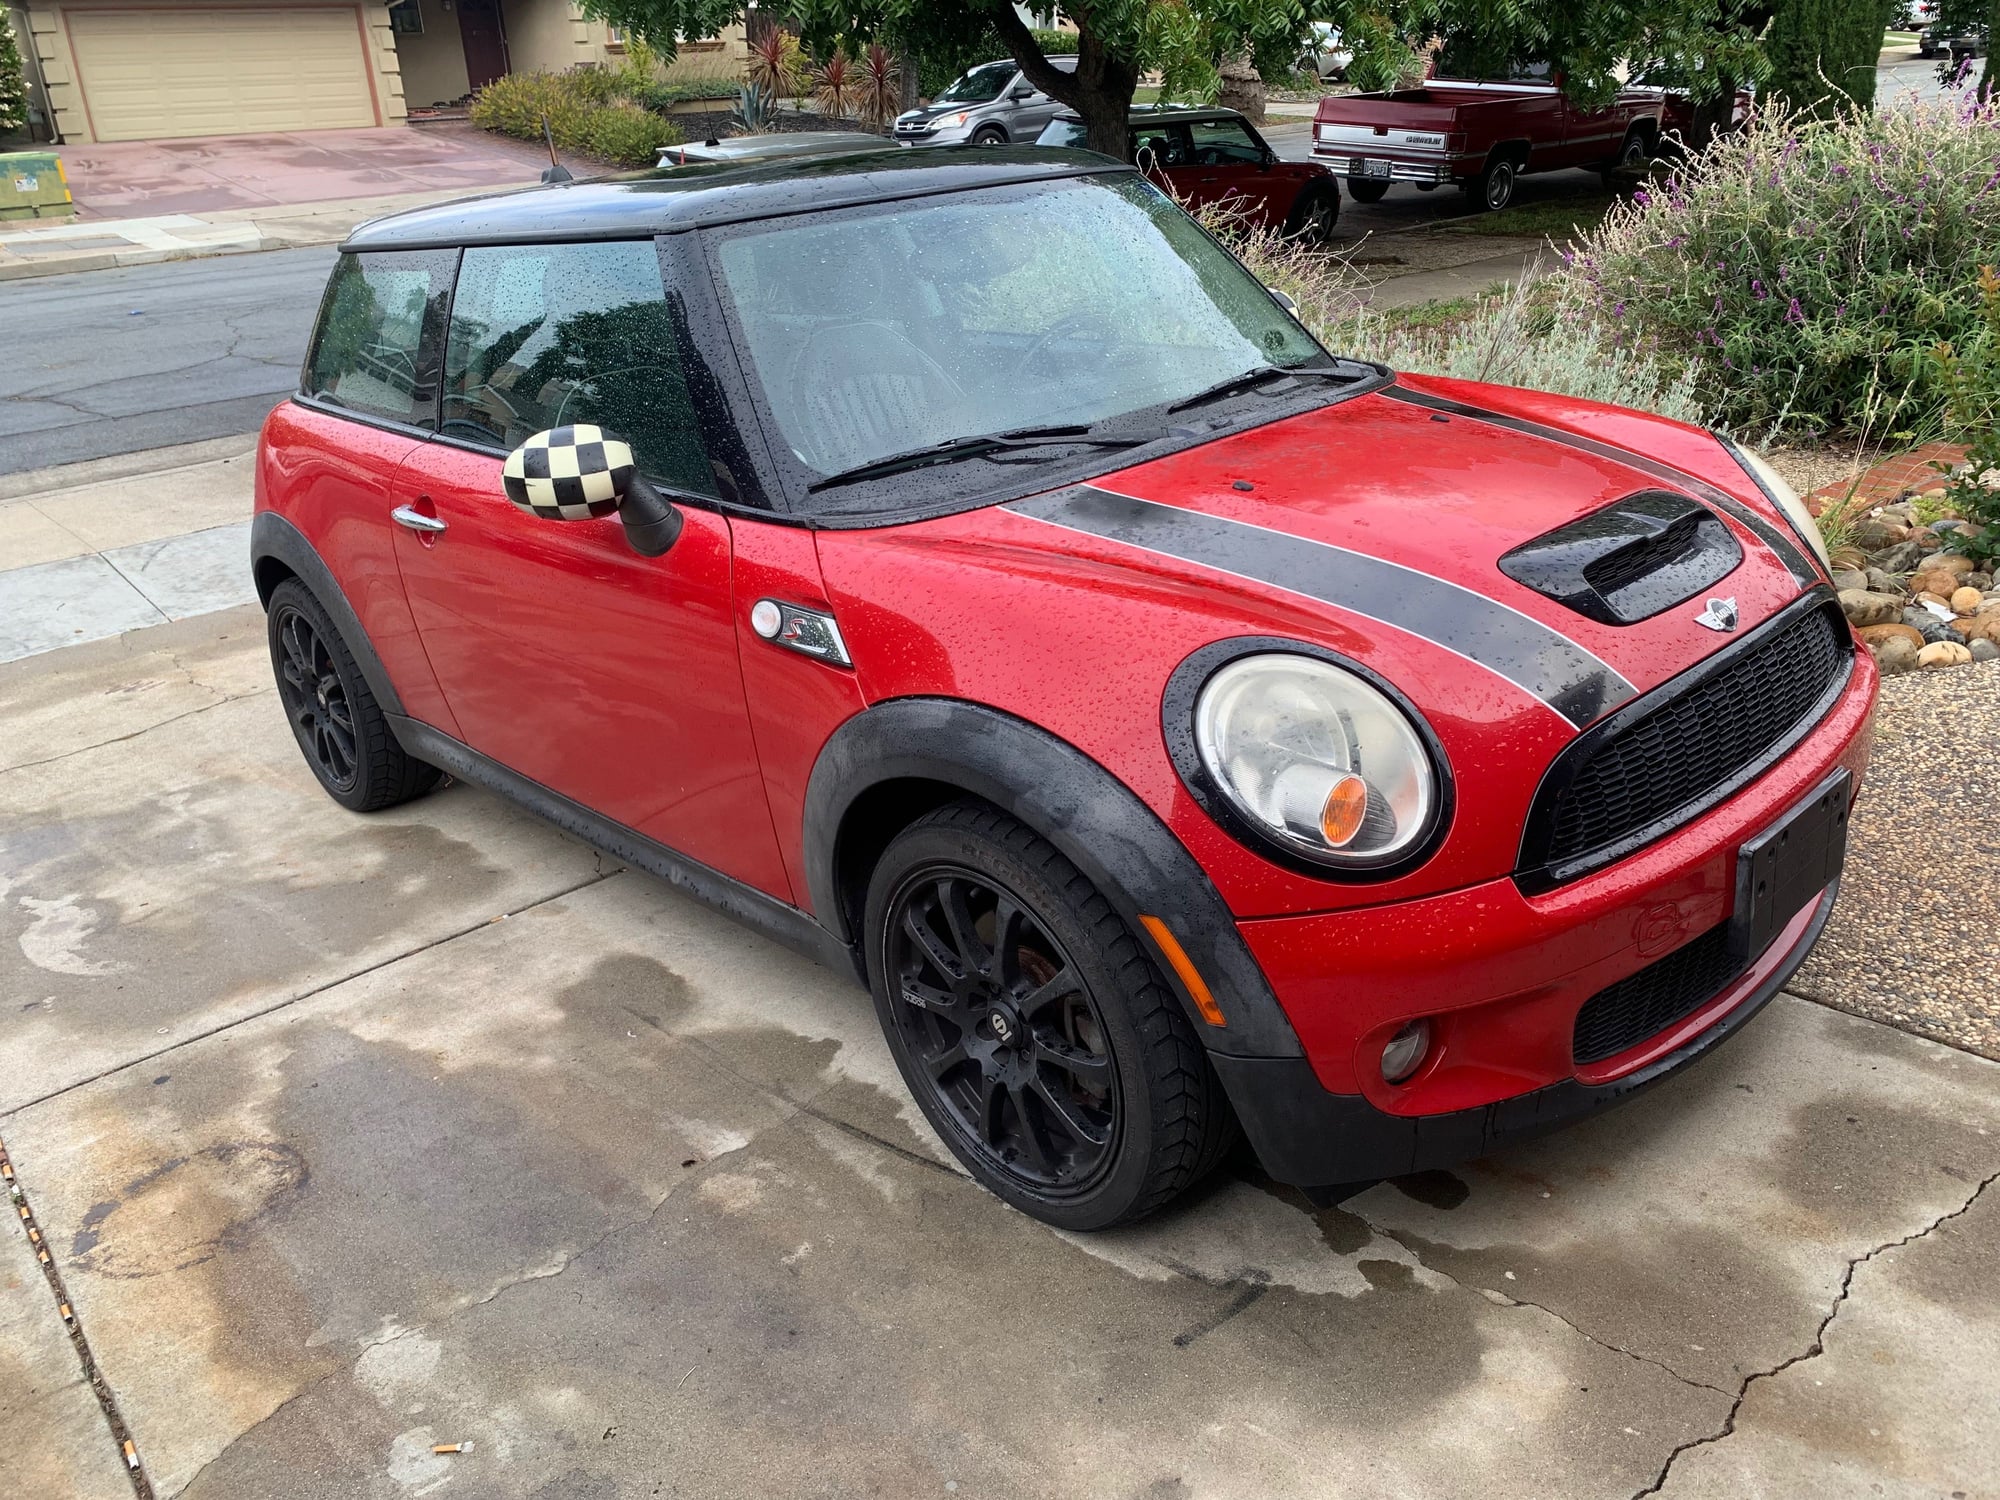 FS:: 4 Mini Coopers for sale!!! - North American Motoring